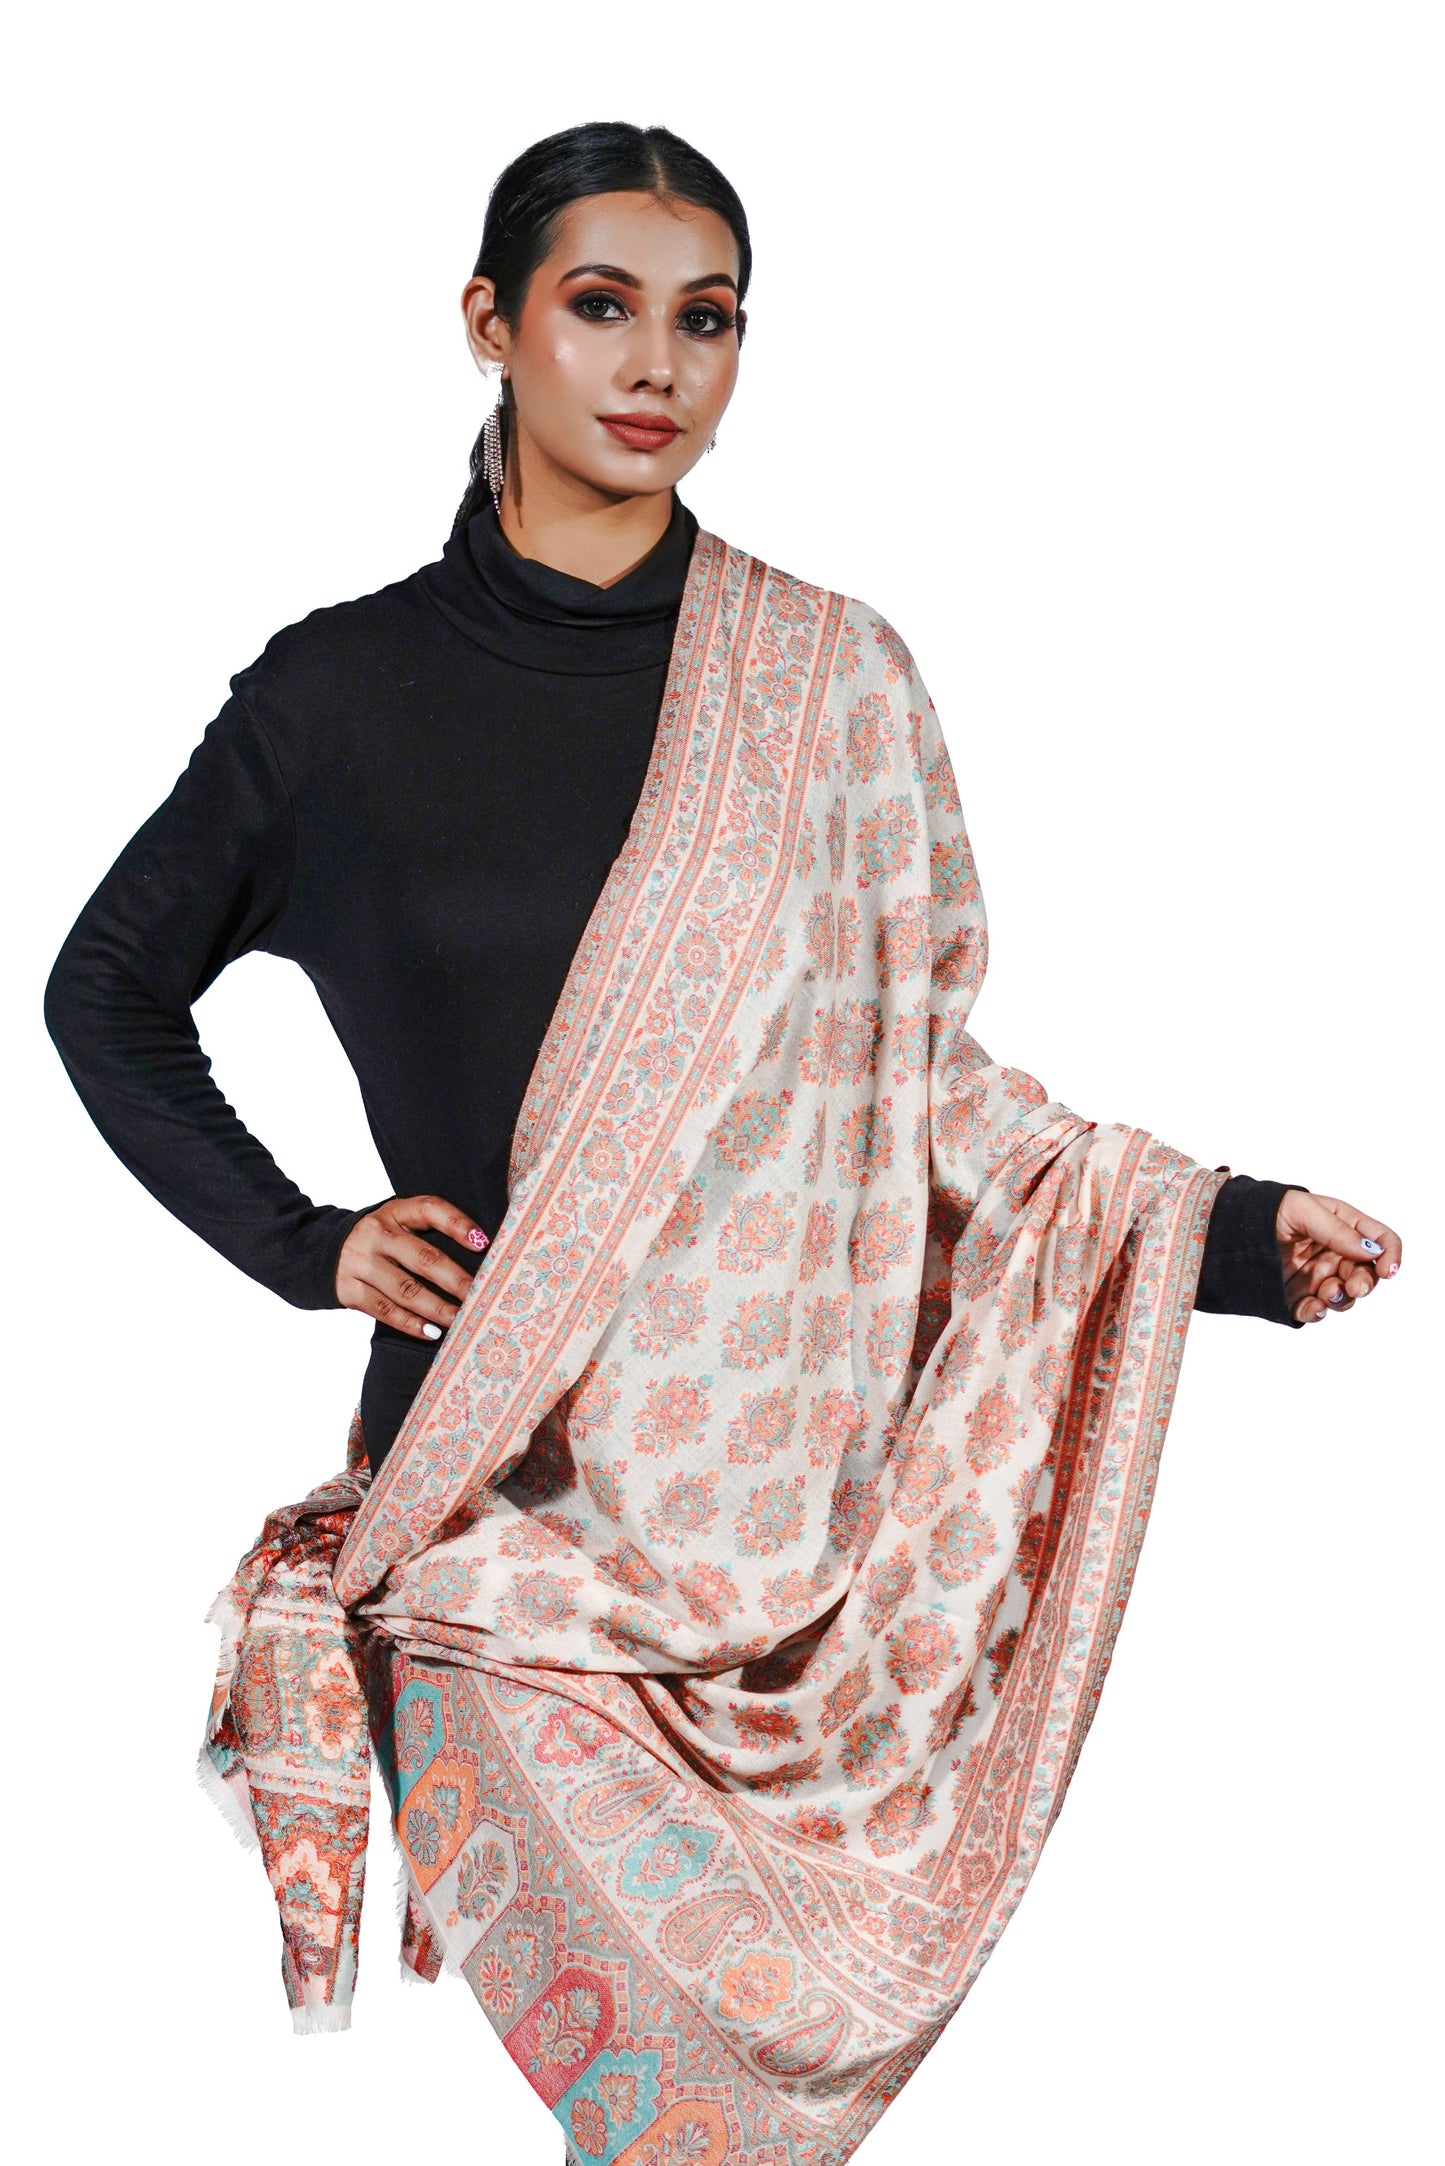 Women's Wool Blend Antique Shawl with Booti Design - Pastel Palette